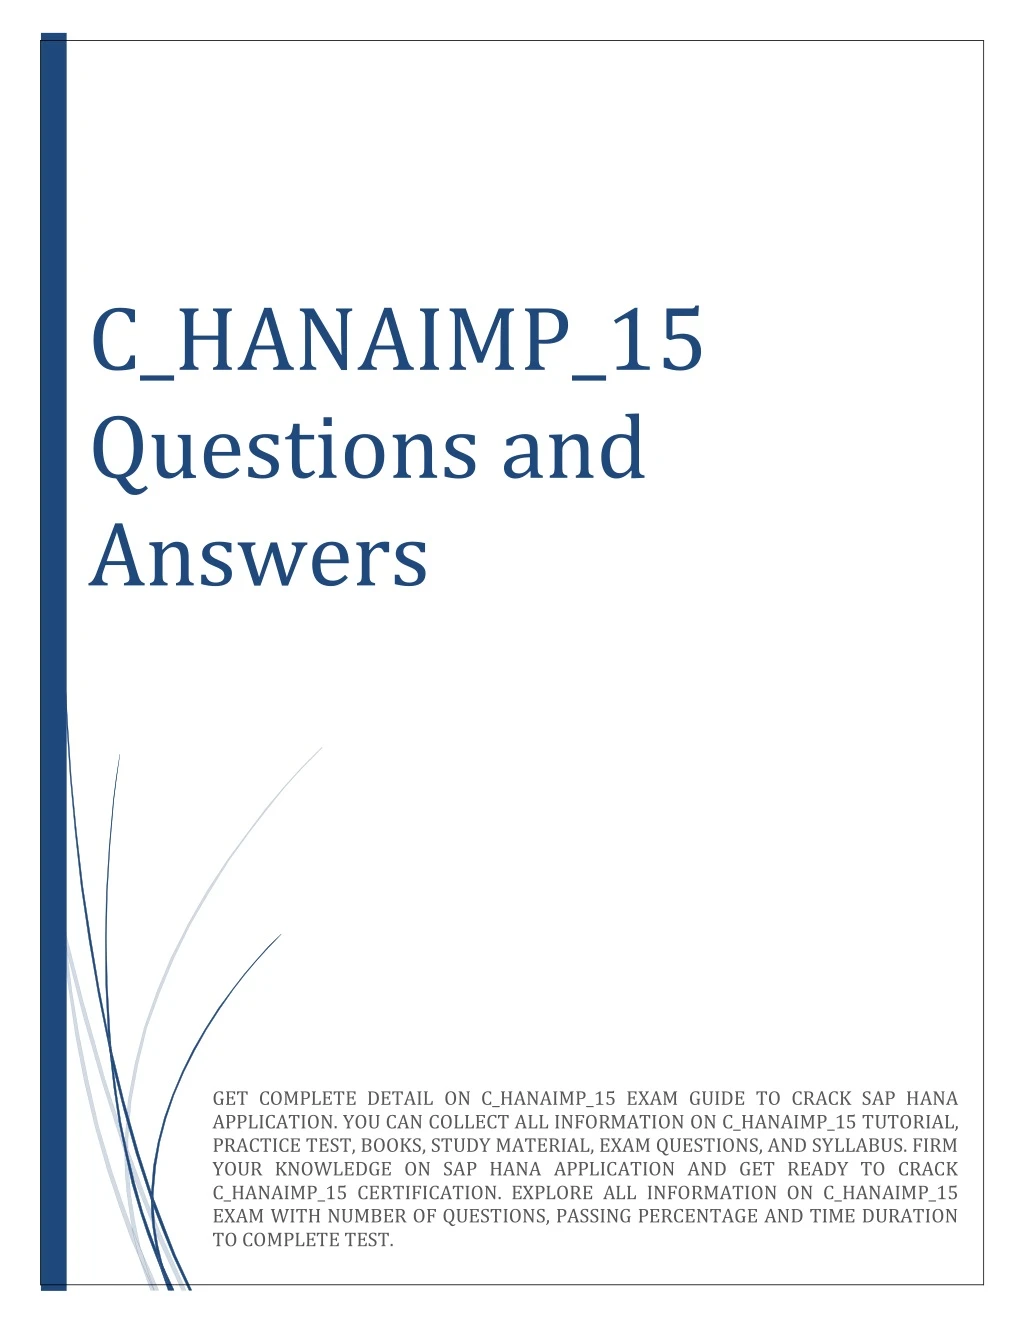 c hanaimp 15 questions and answers